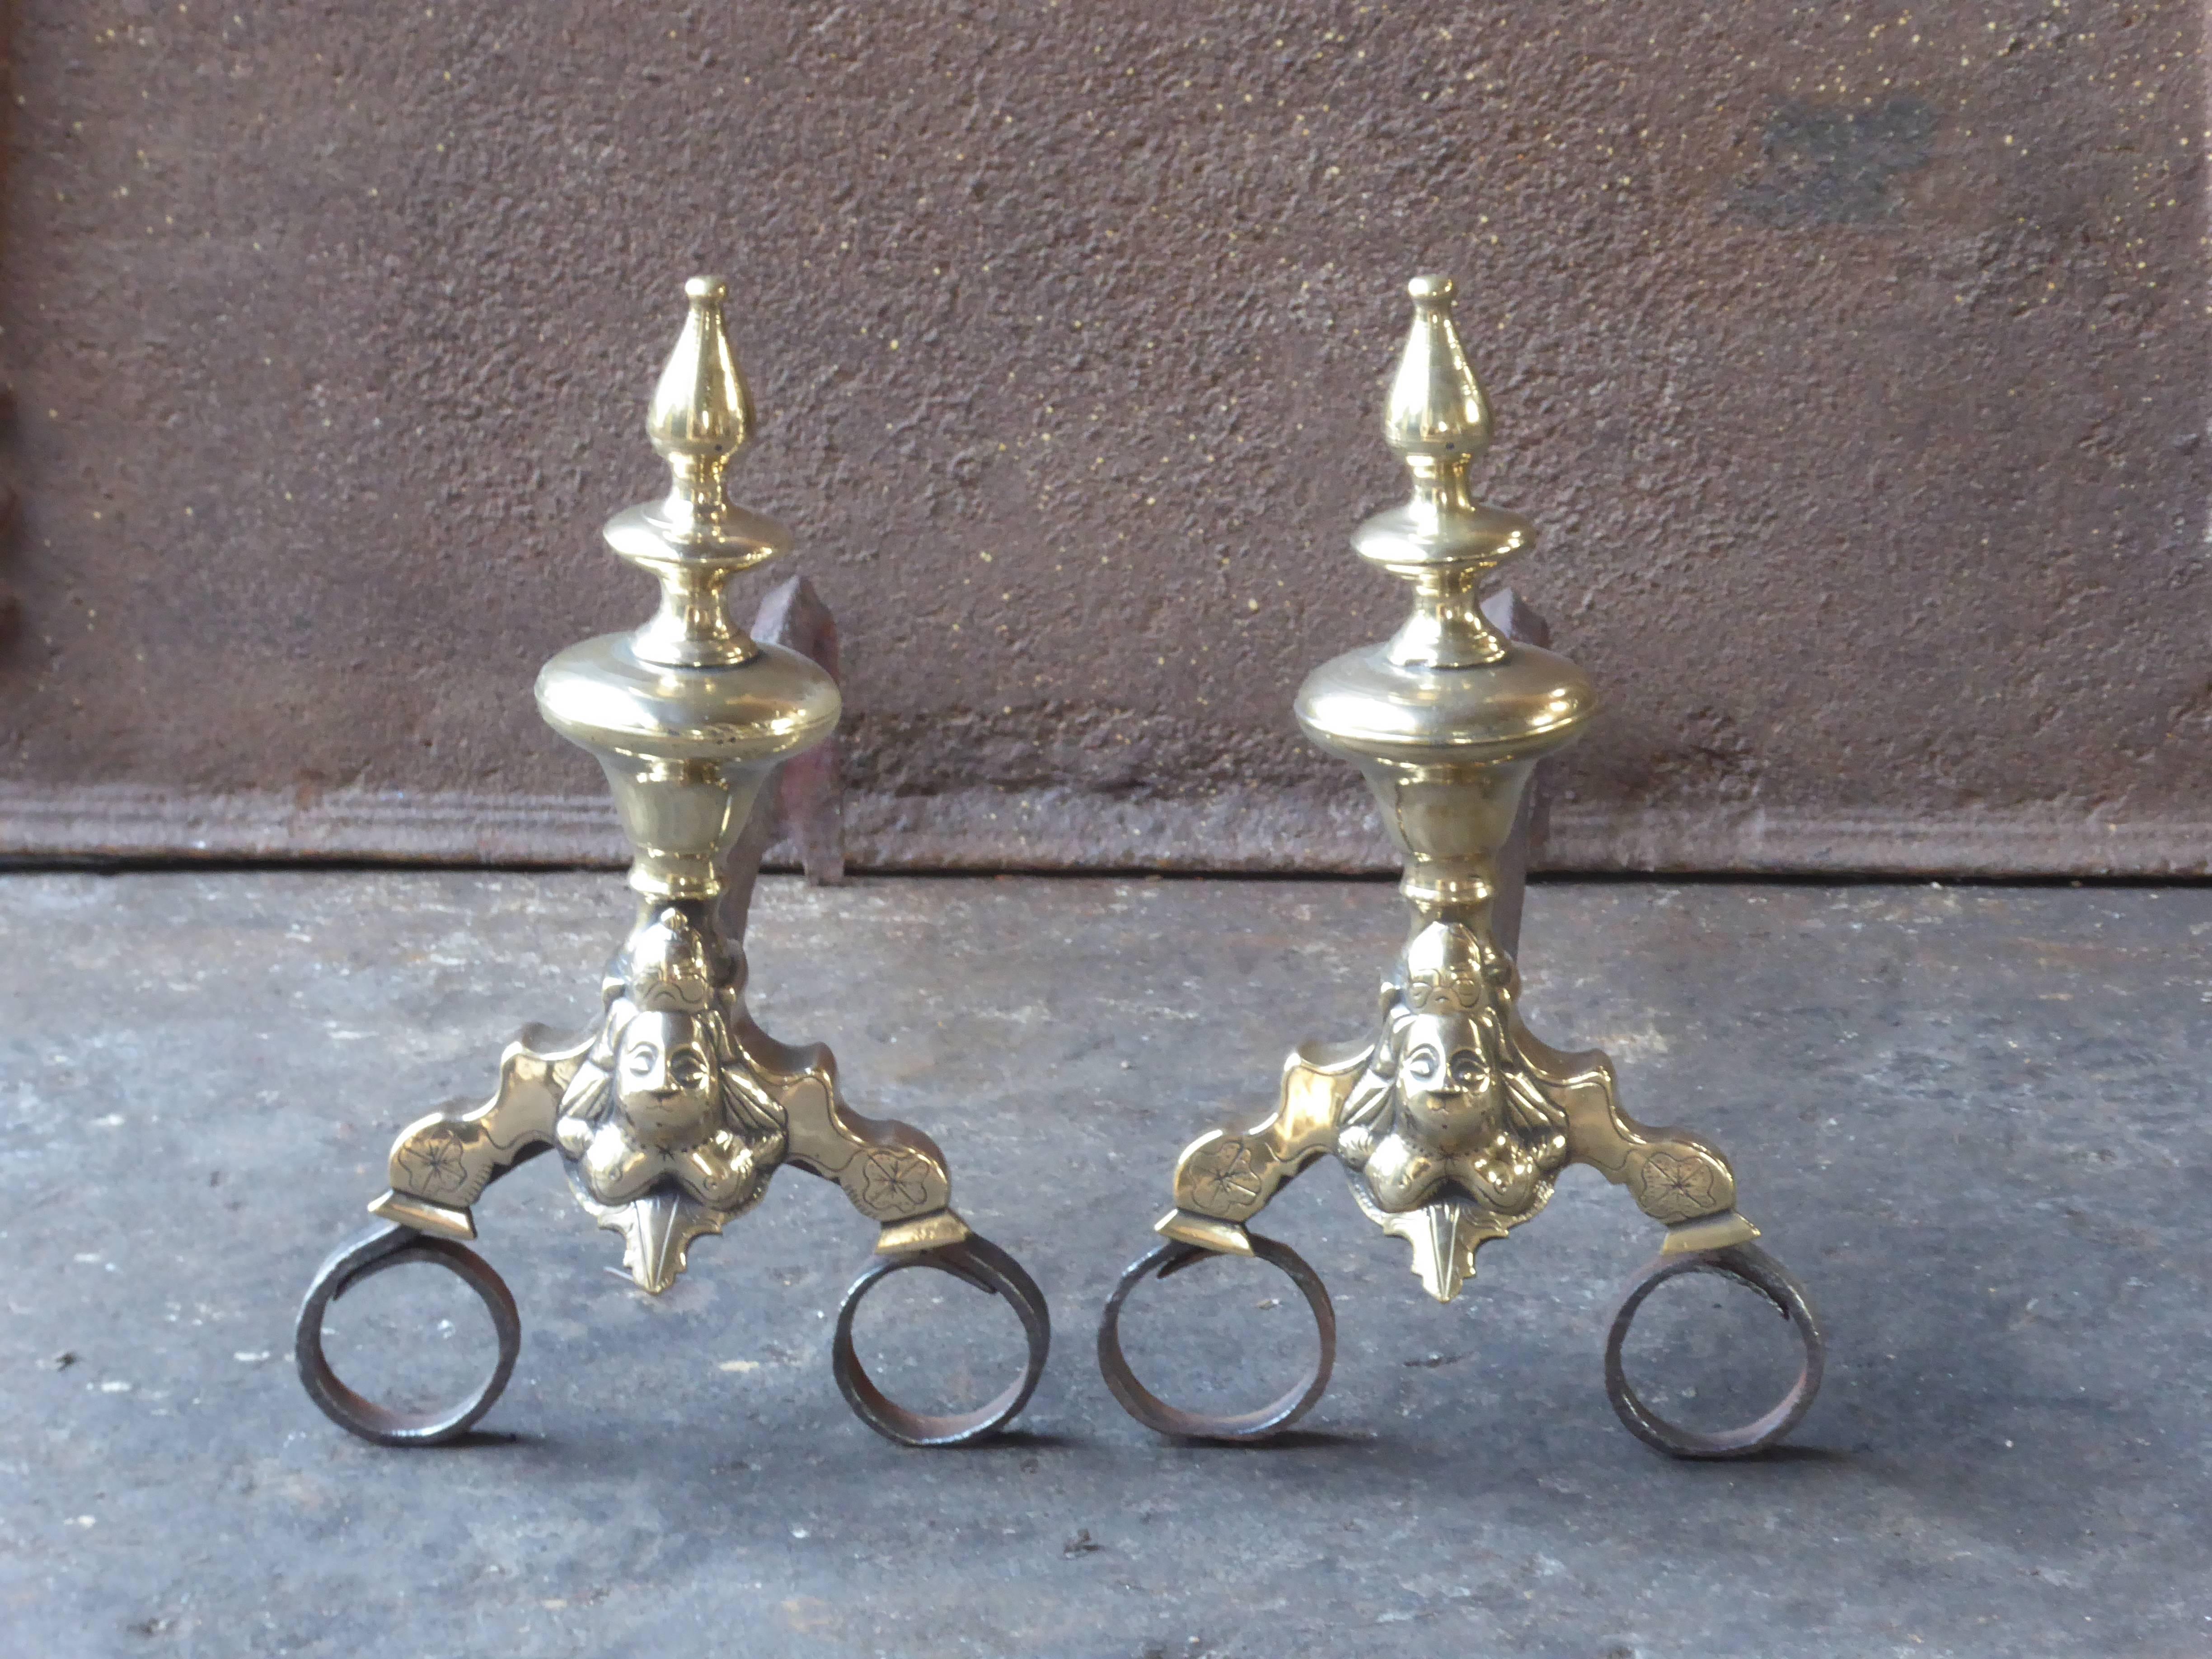 Beautiful 17th century French Louis XIV andirons made of bronze and wrought iron.

The condition of the andirons is good. They are fit for use in the fireplace.